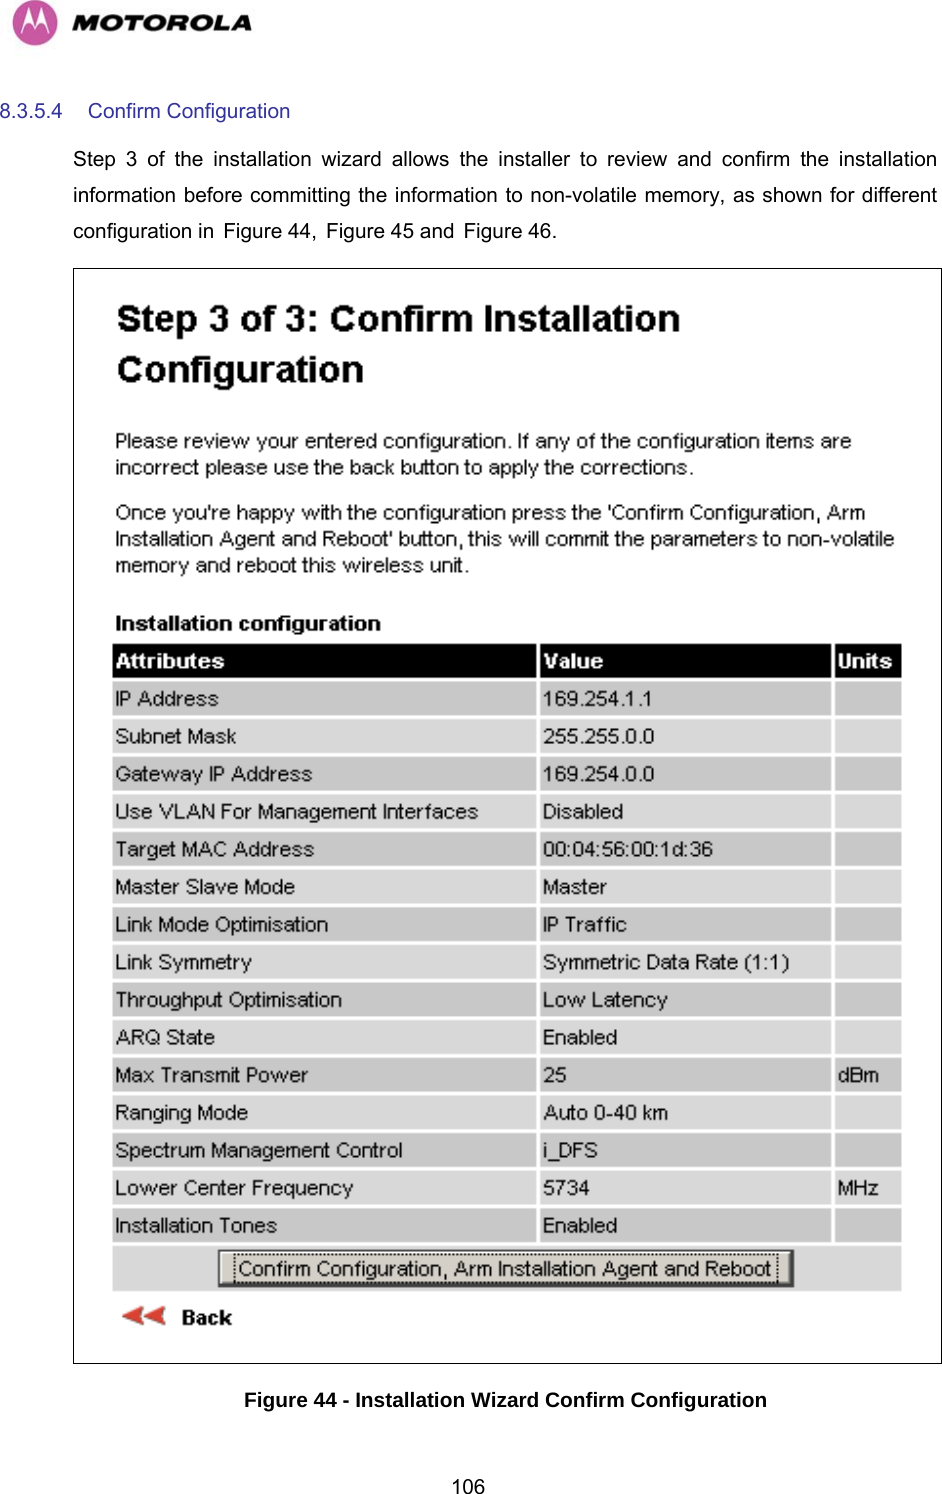   1068.3.5.4  Confirm Configuration  Step 3 of the installation wizard allows the installer to review and confirm the installation information before committing the information to non-volatile memory, as shown for different configuration in HFigure 44, HFigure 45 and HFigure 46.  Figure 44 - Installation Wizard Confirm Configuration  